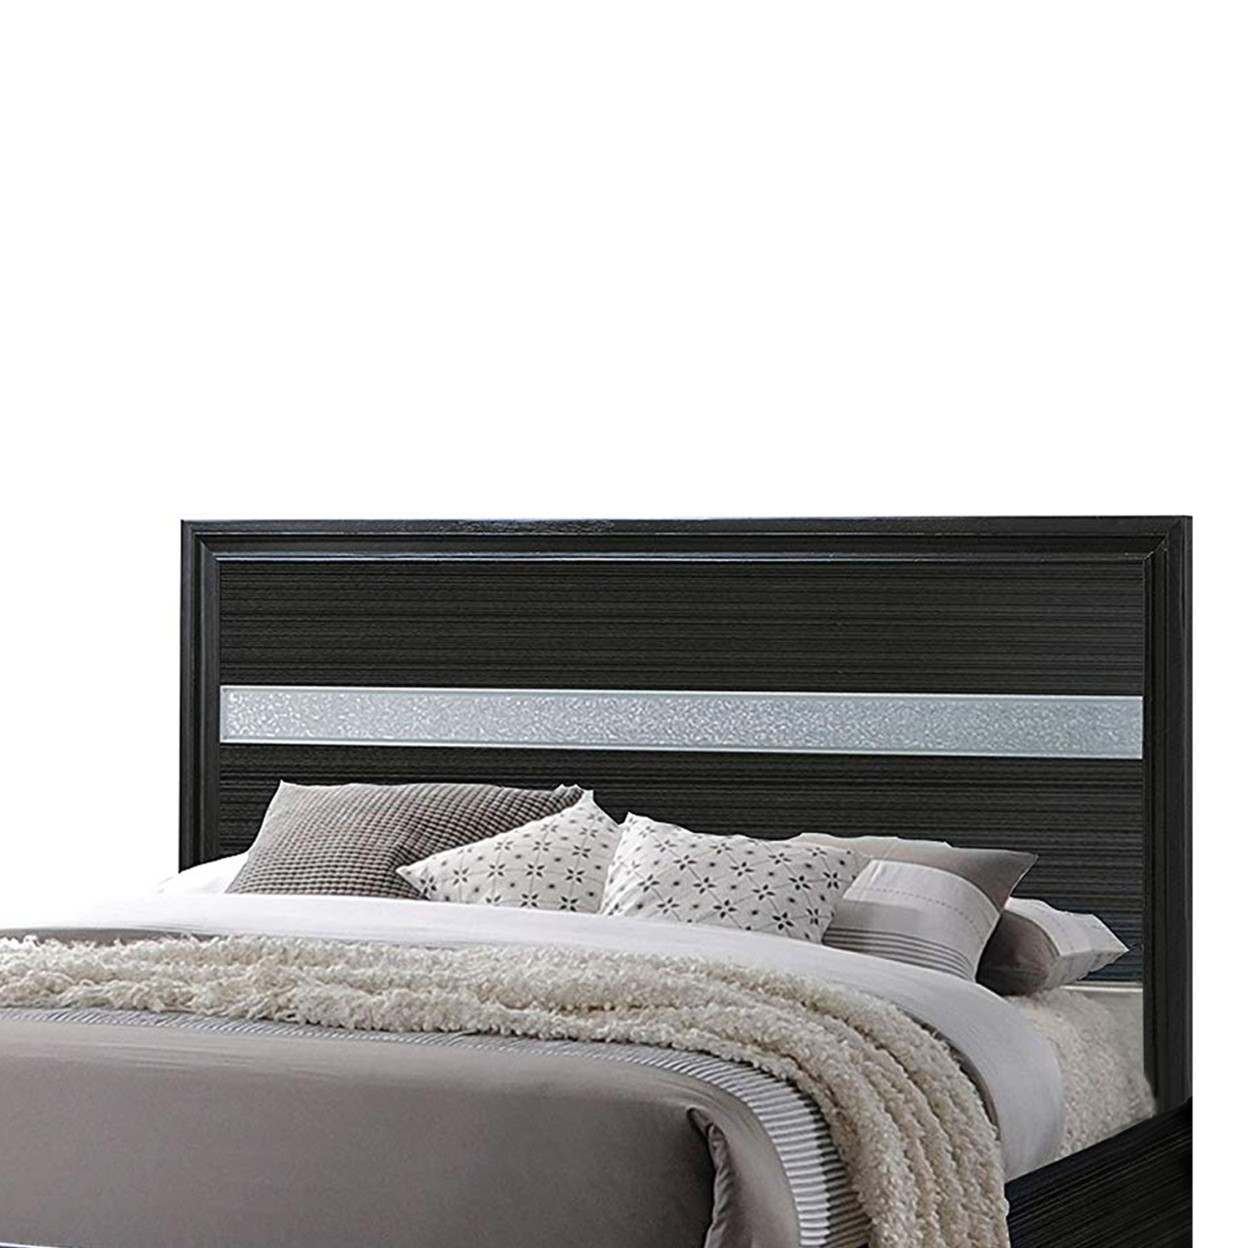 Wooden Twin Size Bed With Bracket Legs And Crystal Accented Headboard, Black- Saltoro Sherpi